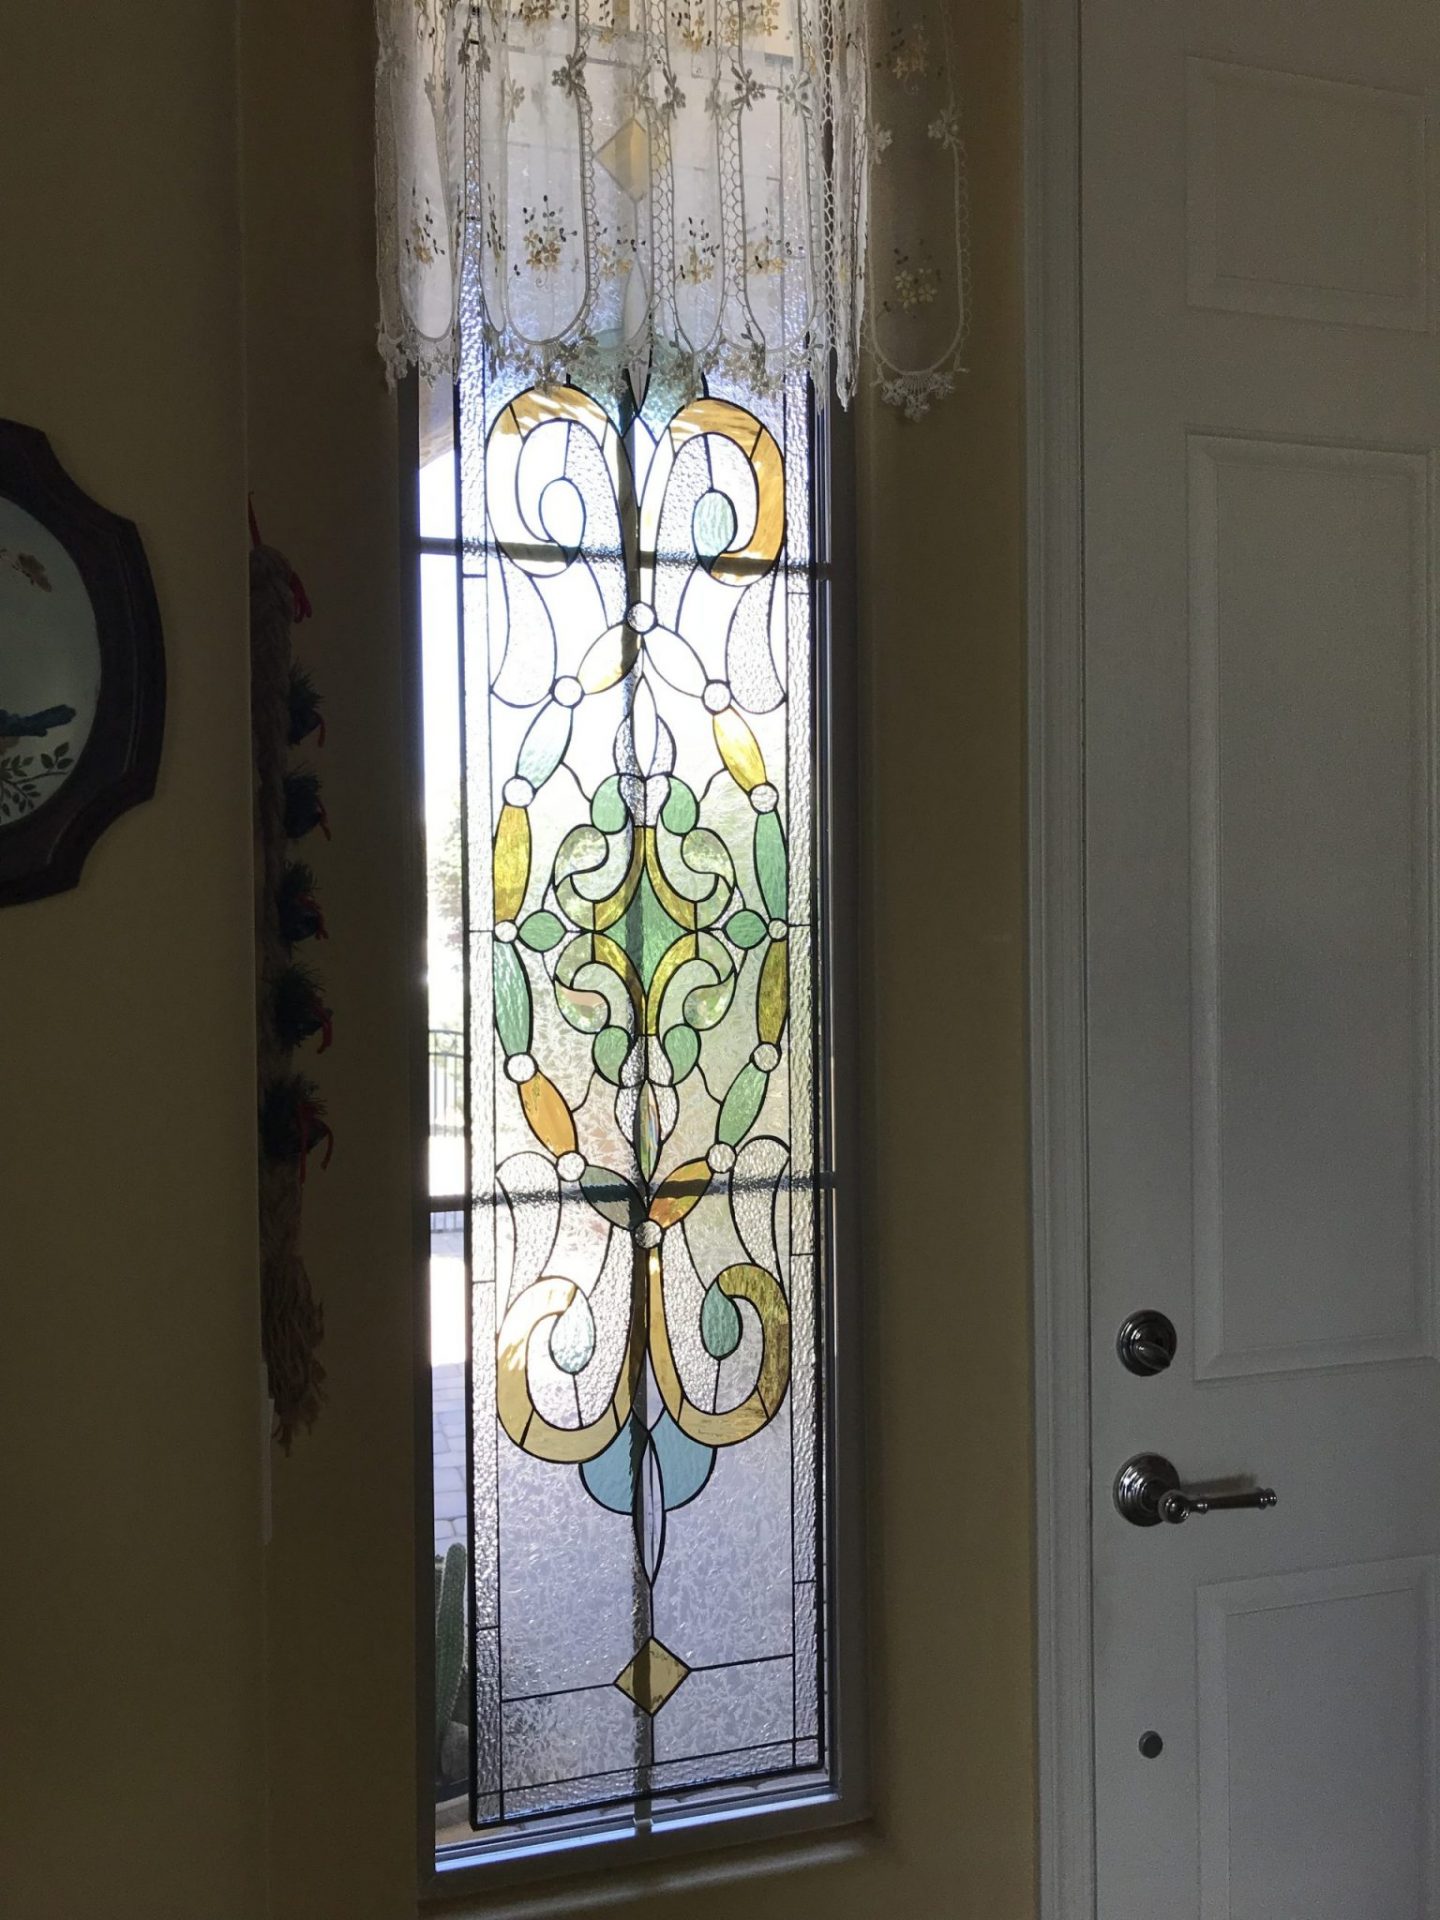 Victorian Stained Glass Window Set Against Existing Window With Grid System And Still Looks Great!